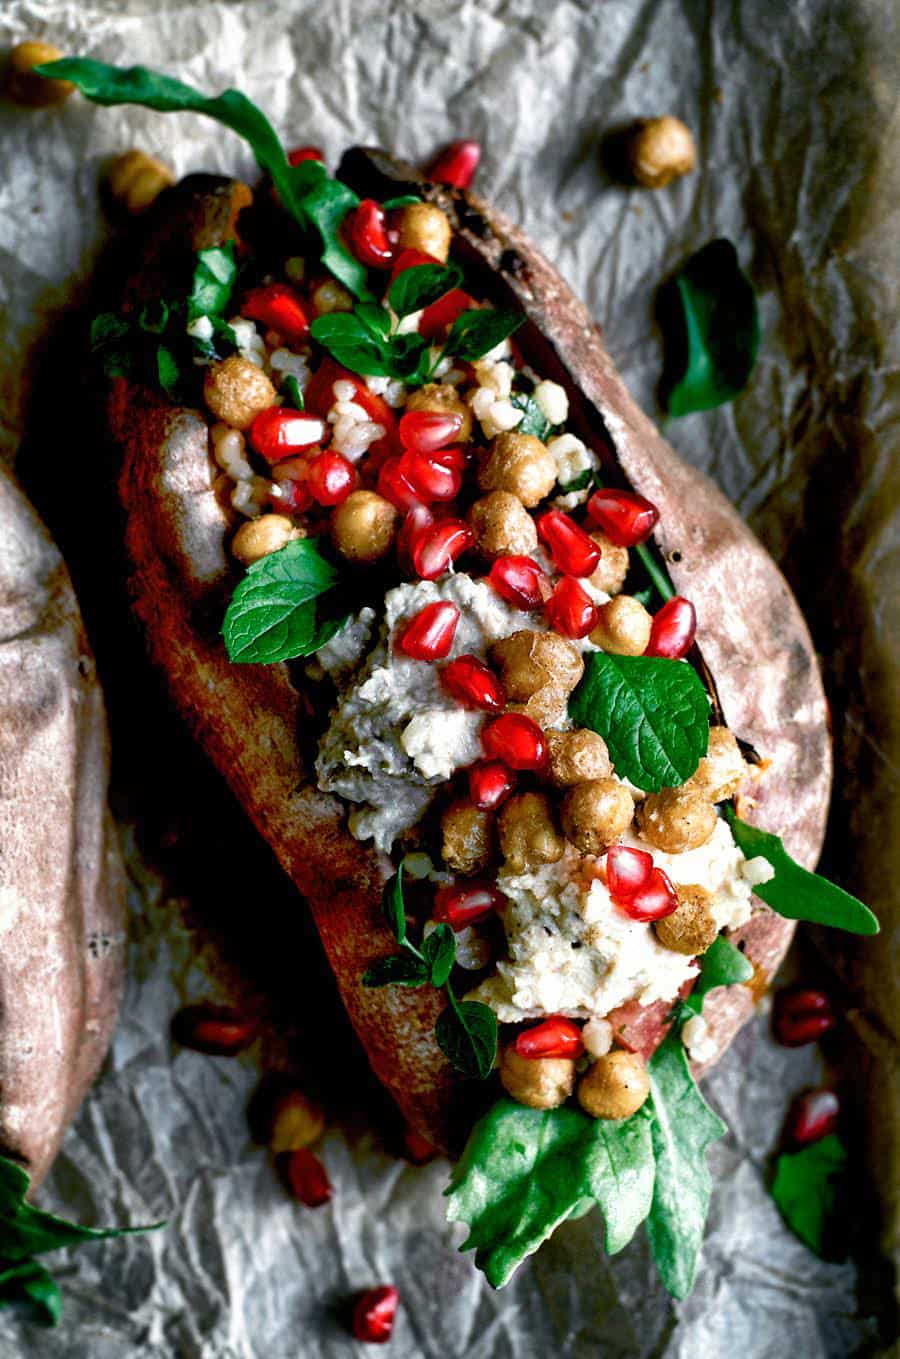 Sweet potato stuffed with chickpeas and rice and topped with pomegranate and mint leaves.